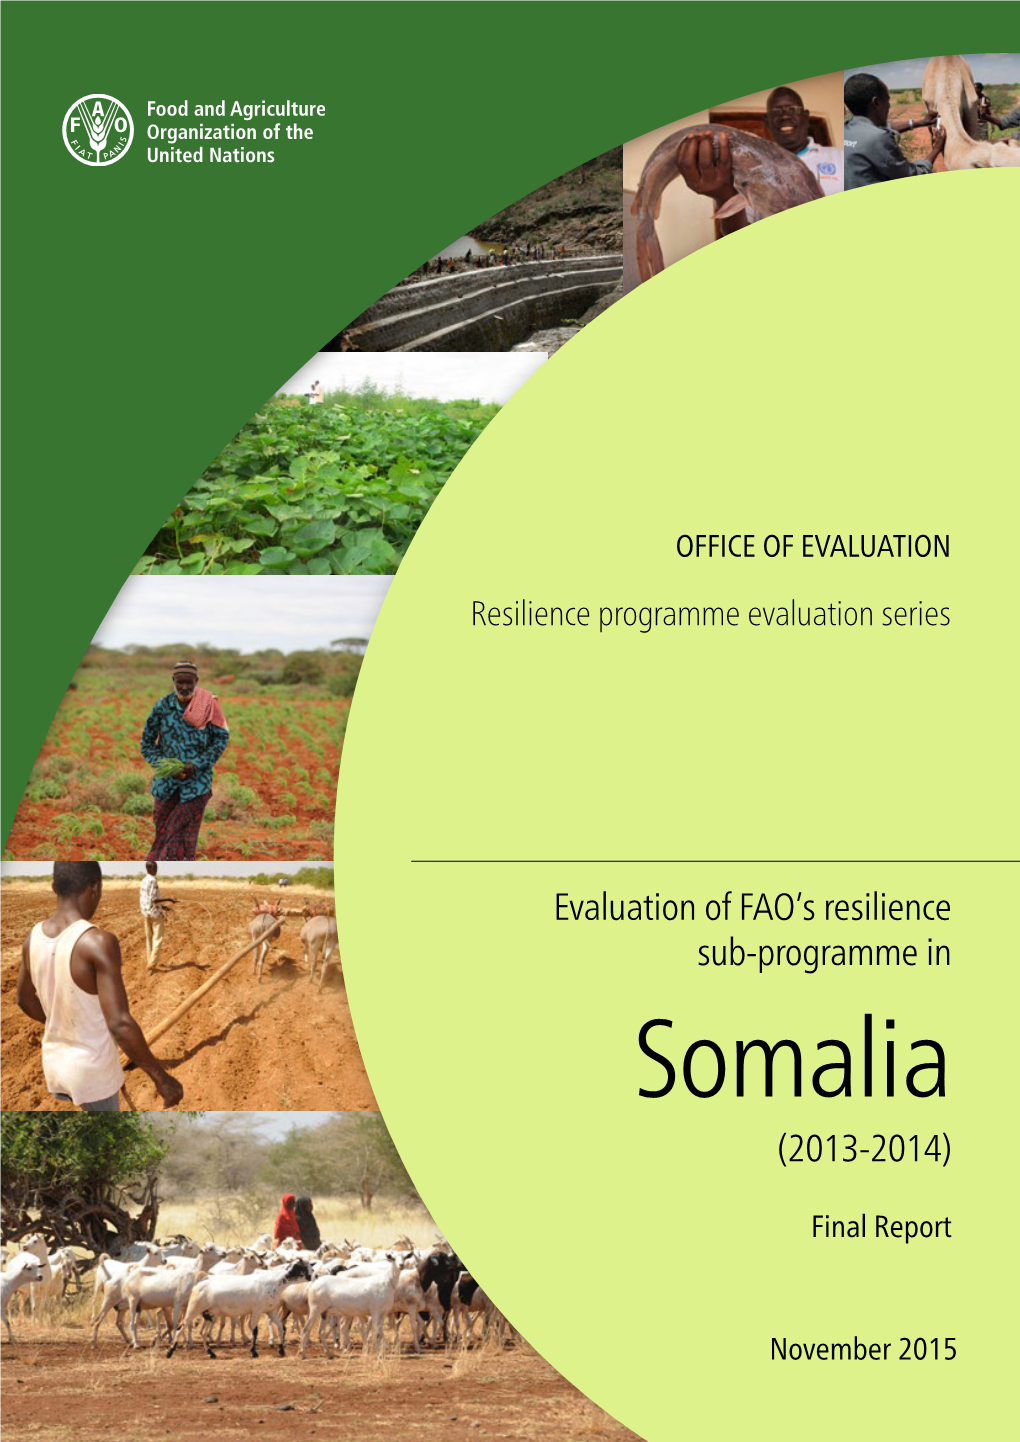 Evaluation of FAO's Resilience Sub-Programme in Somalia 2013